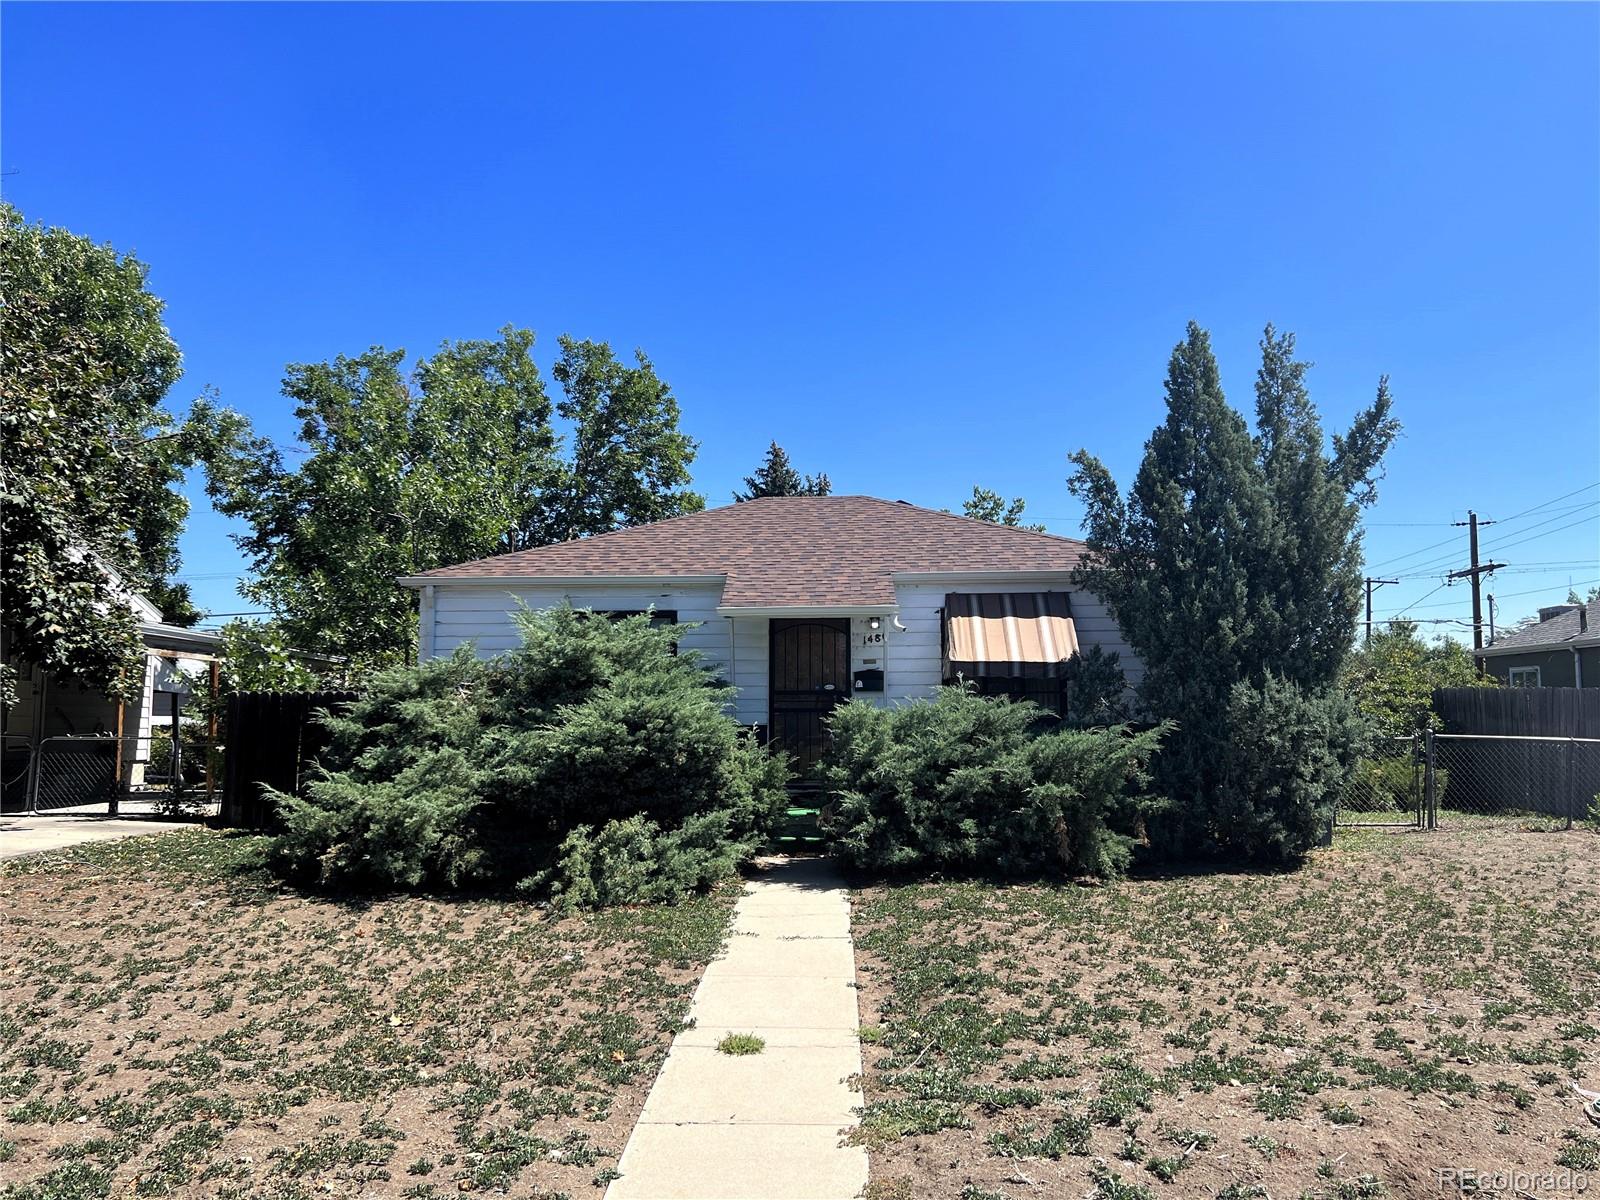 1480 s dale court, Denver sold home. Closed on 2024-02-29 for $383,000.